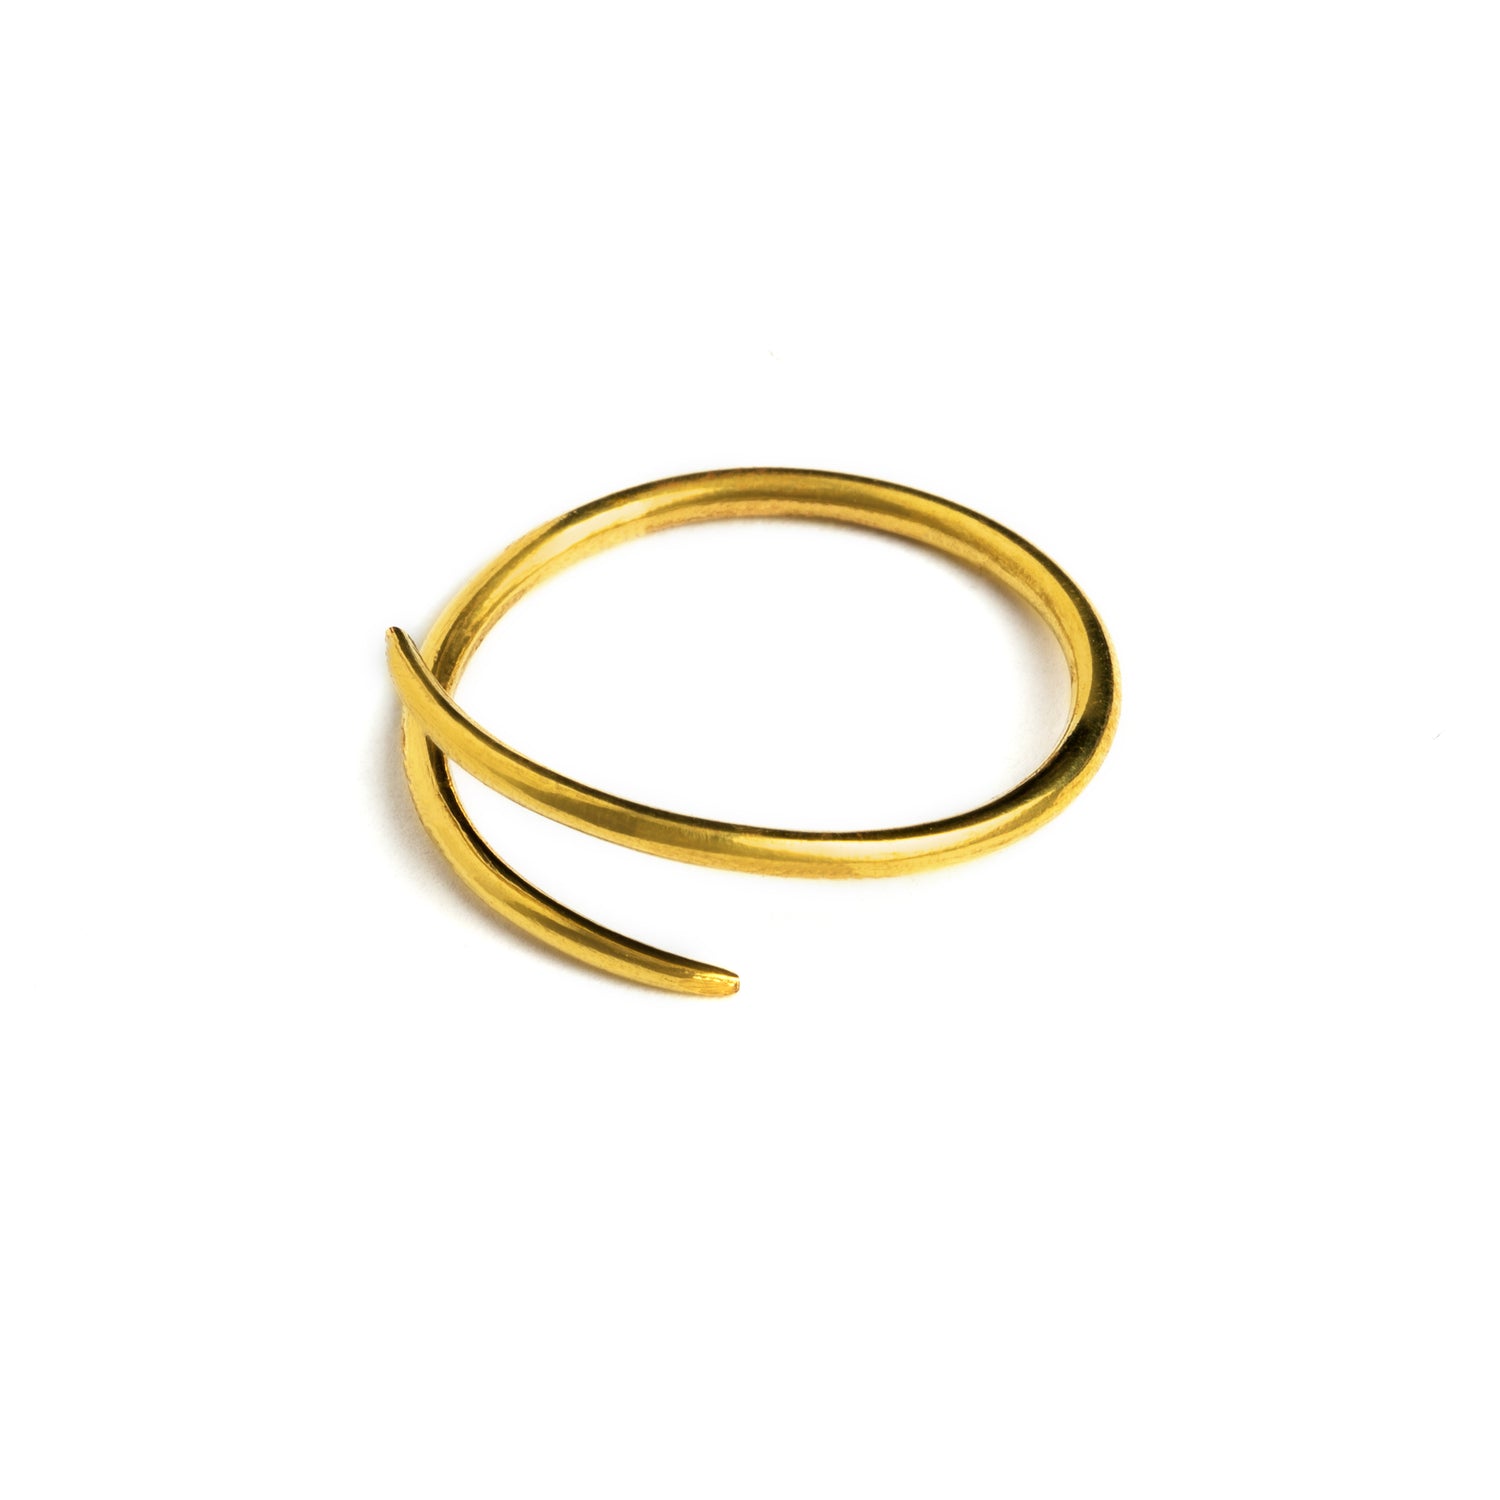 single golden brass wire circular hoop earring right side view